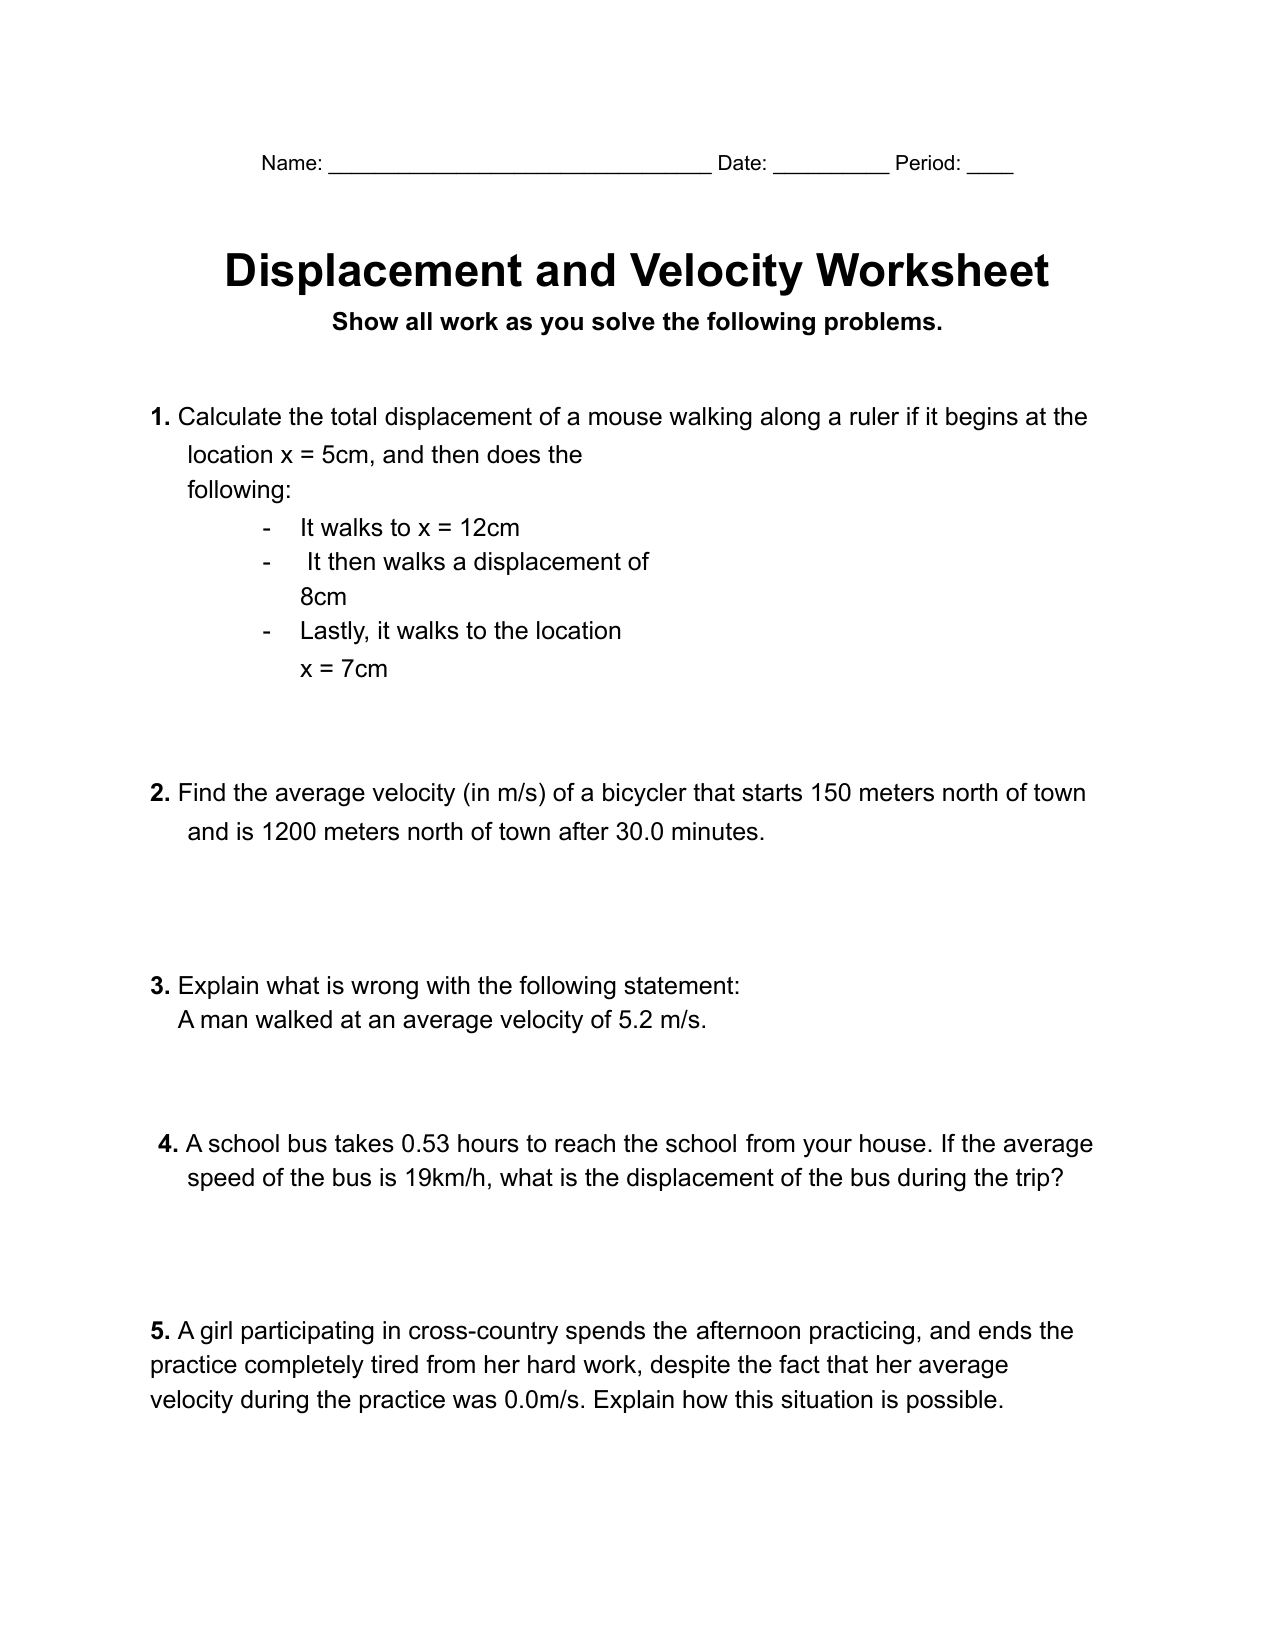 Displacement and Velocity - Worksheet Within Displacement And Velocity Worksheet